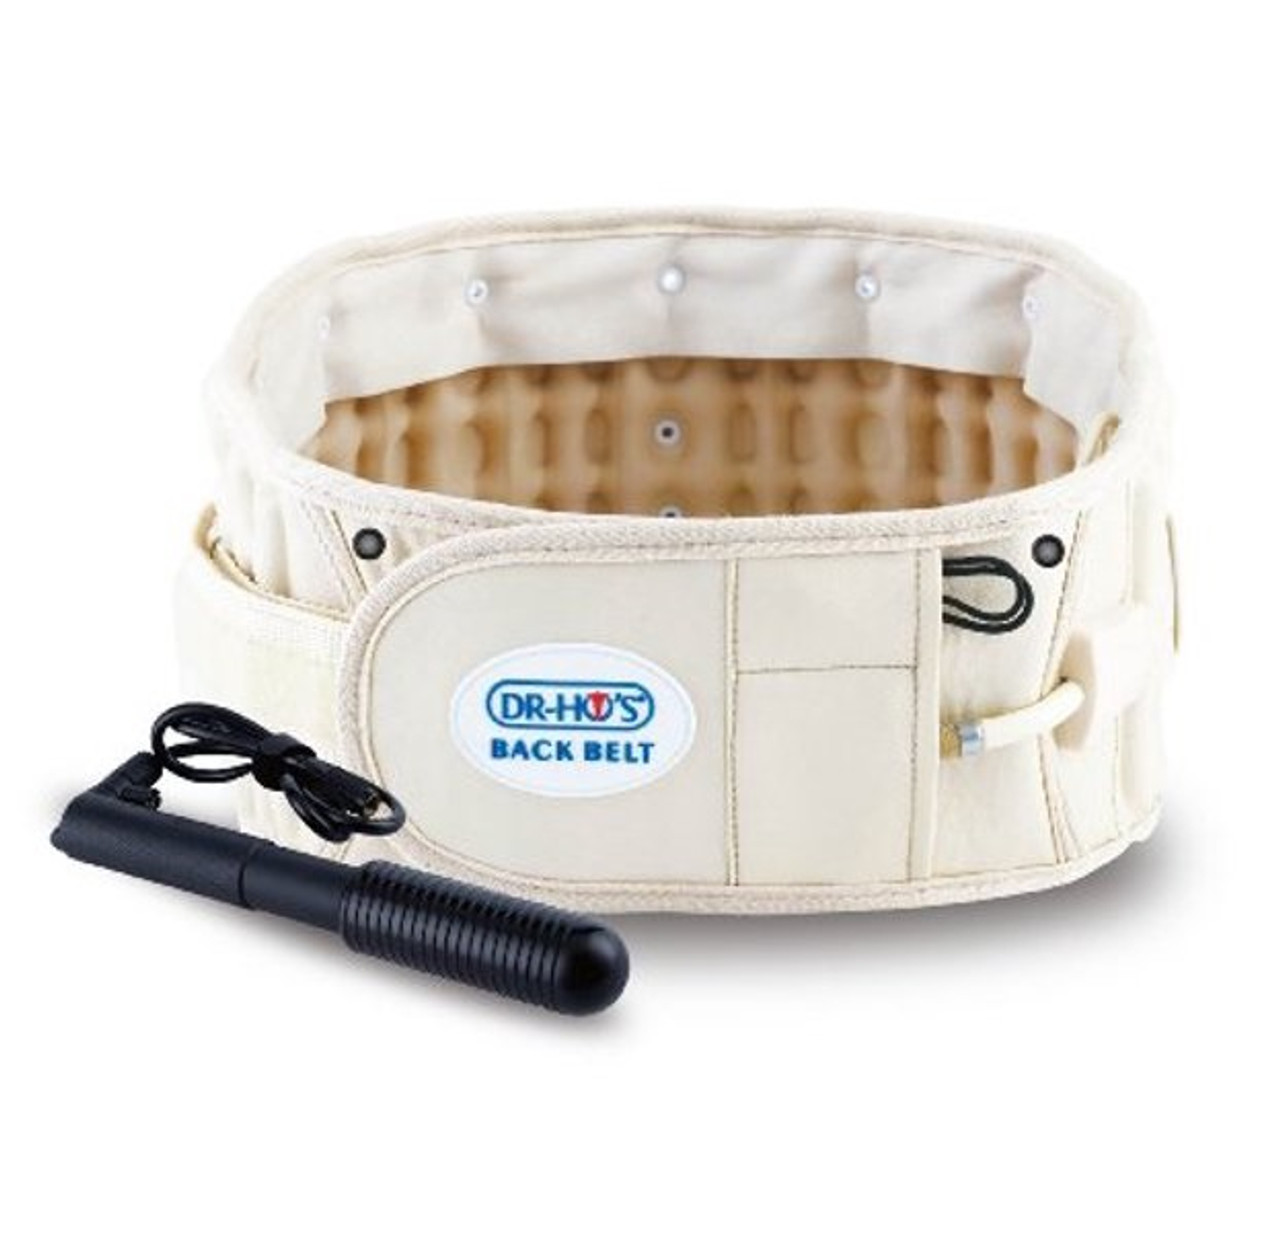 Dr-Ho's 2 in 1 Back Relief Stretch & Support Decompression Belt​, Size B (42"-55")